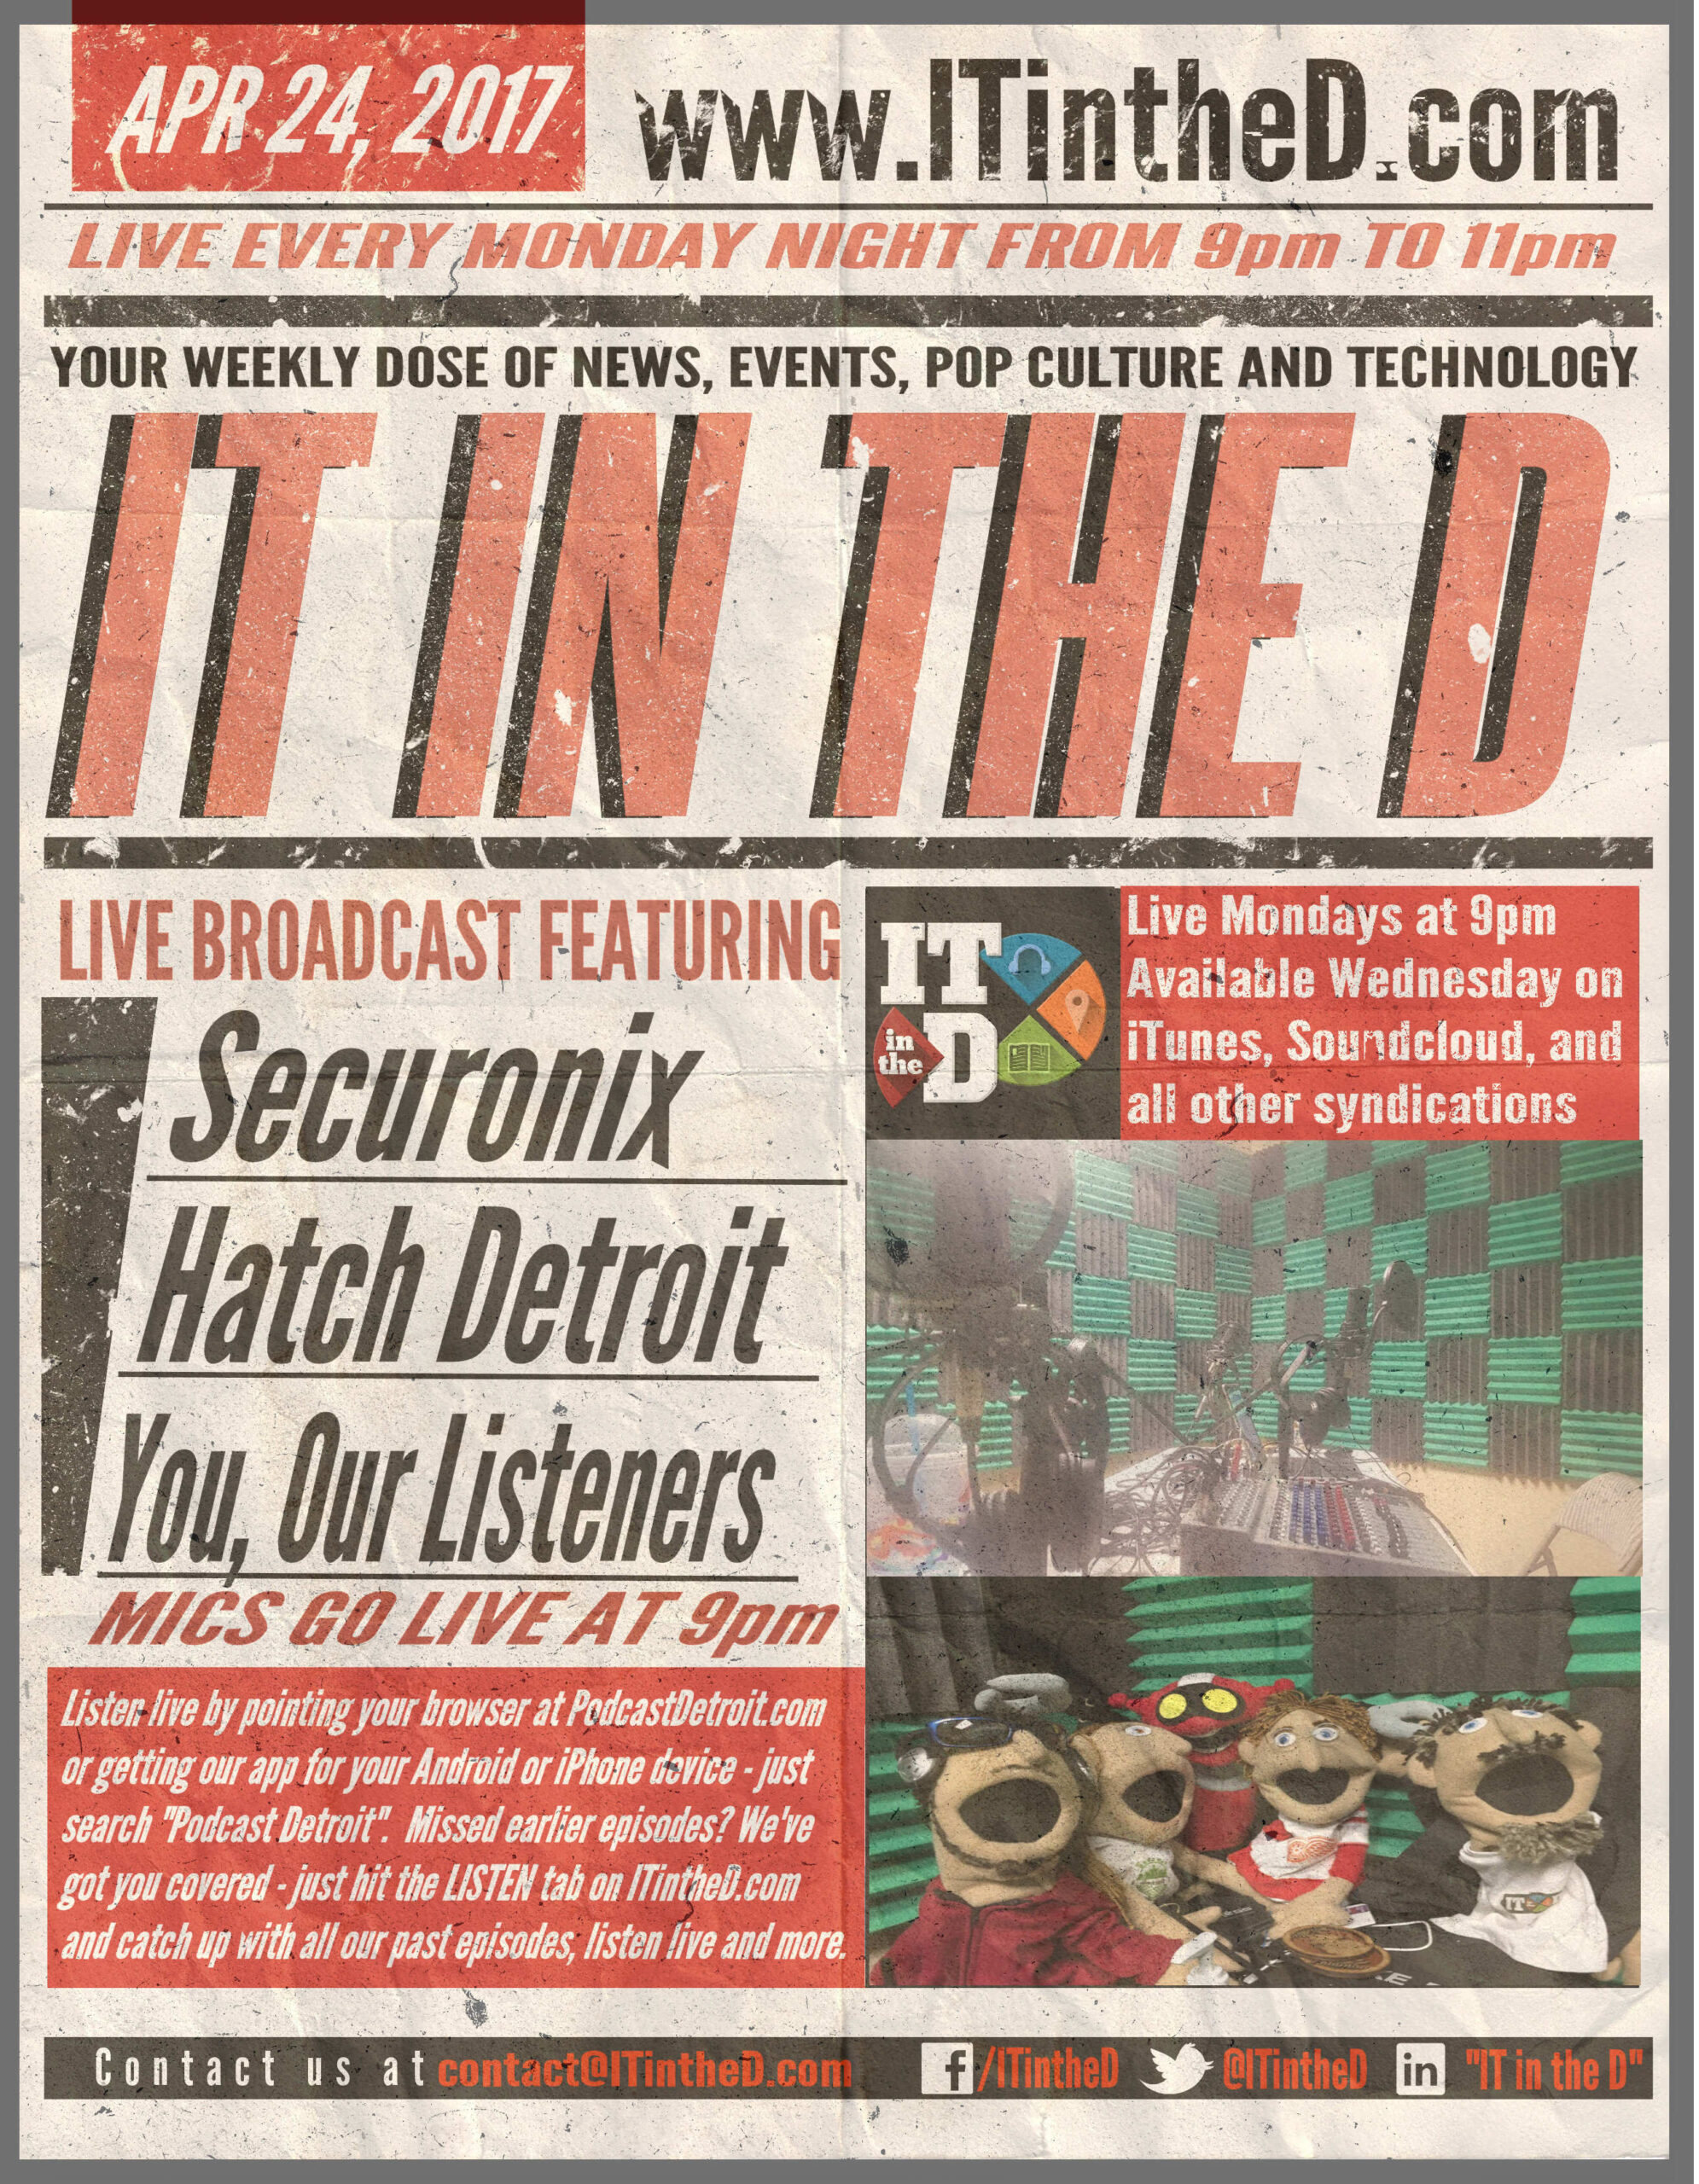 Securonix, Hatch Detroit In Studio Tonight, Career Academy Launch Announcement and More for 4/24/2017